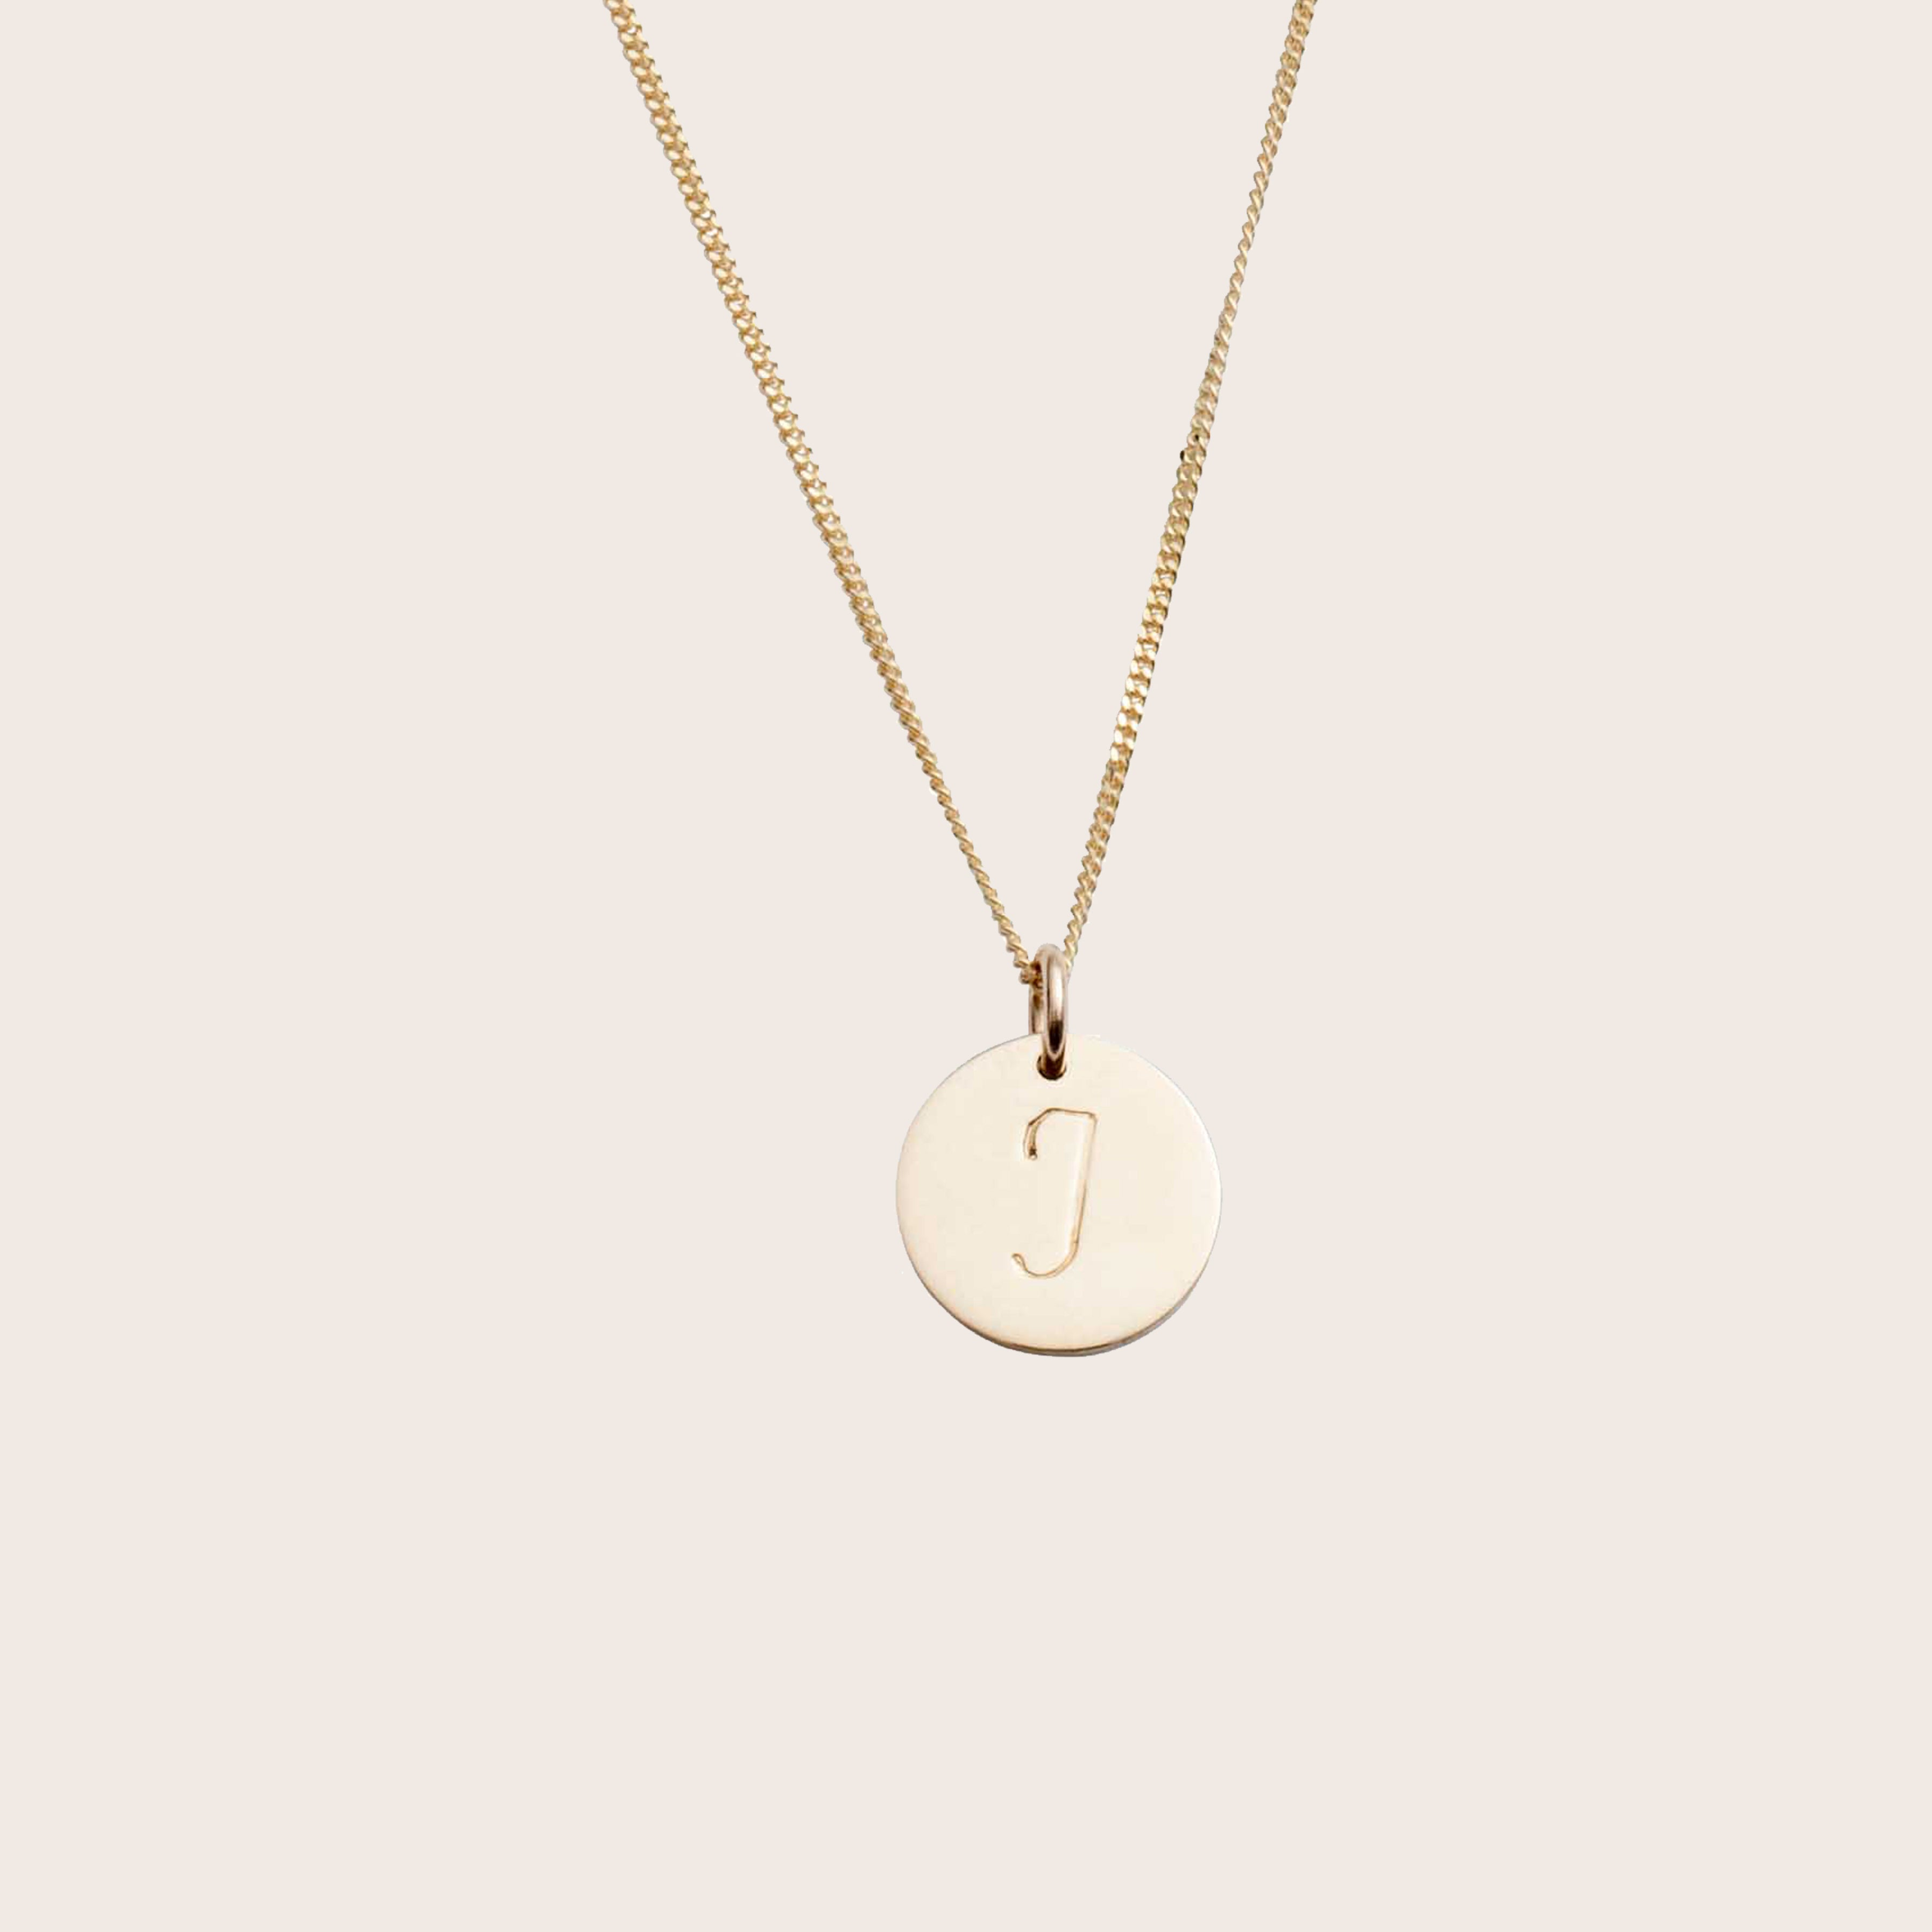 Single Initial Disc Necklace in 9ct Gold - harryrockslondon